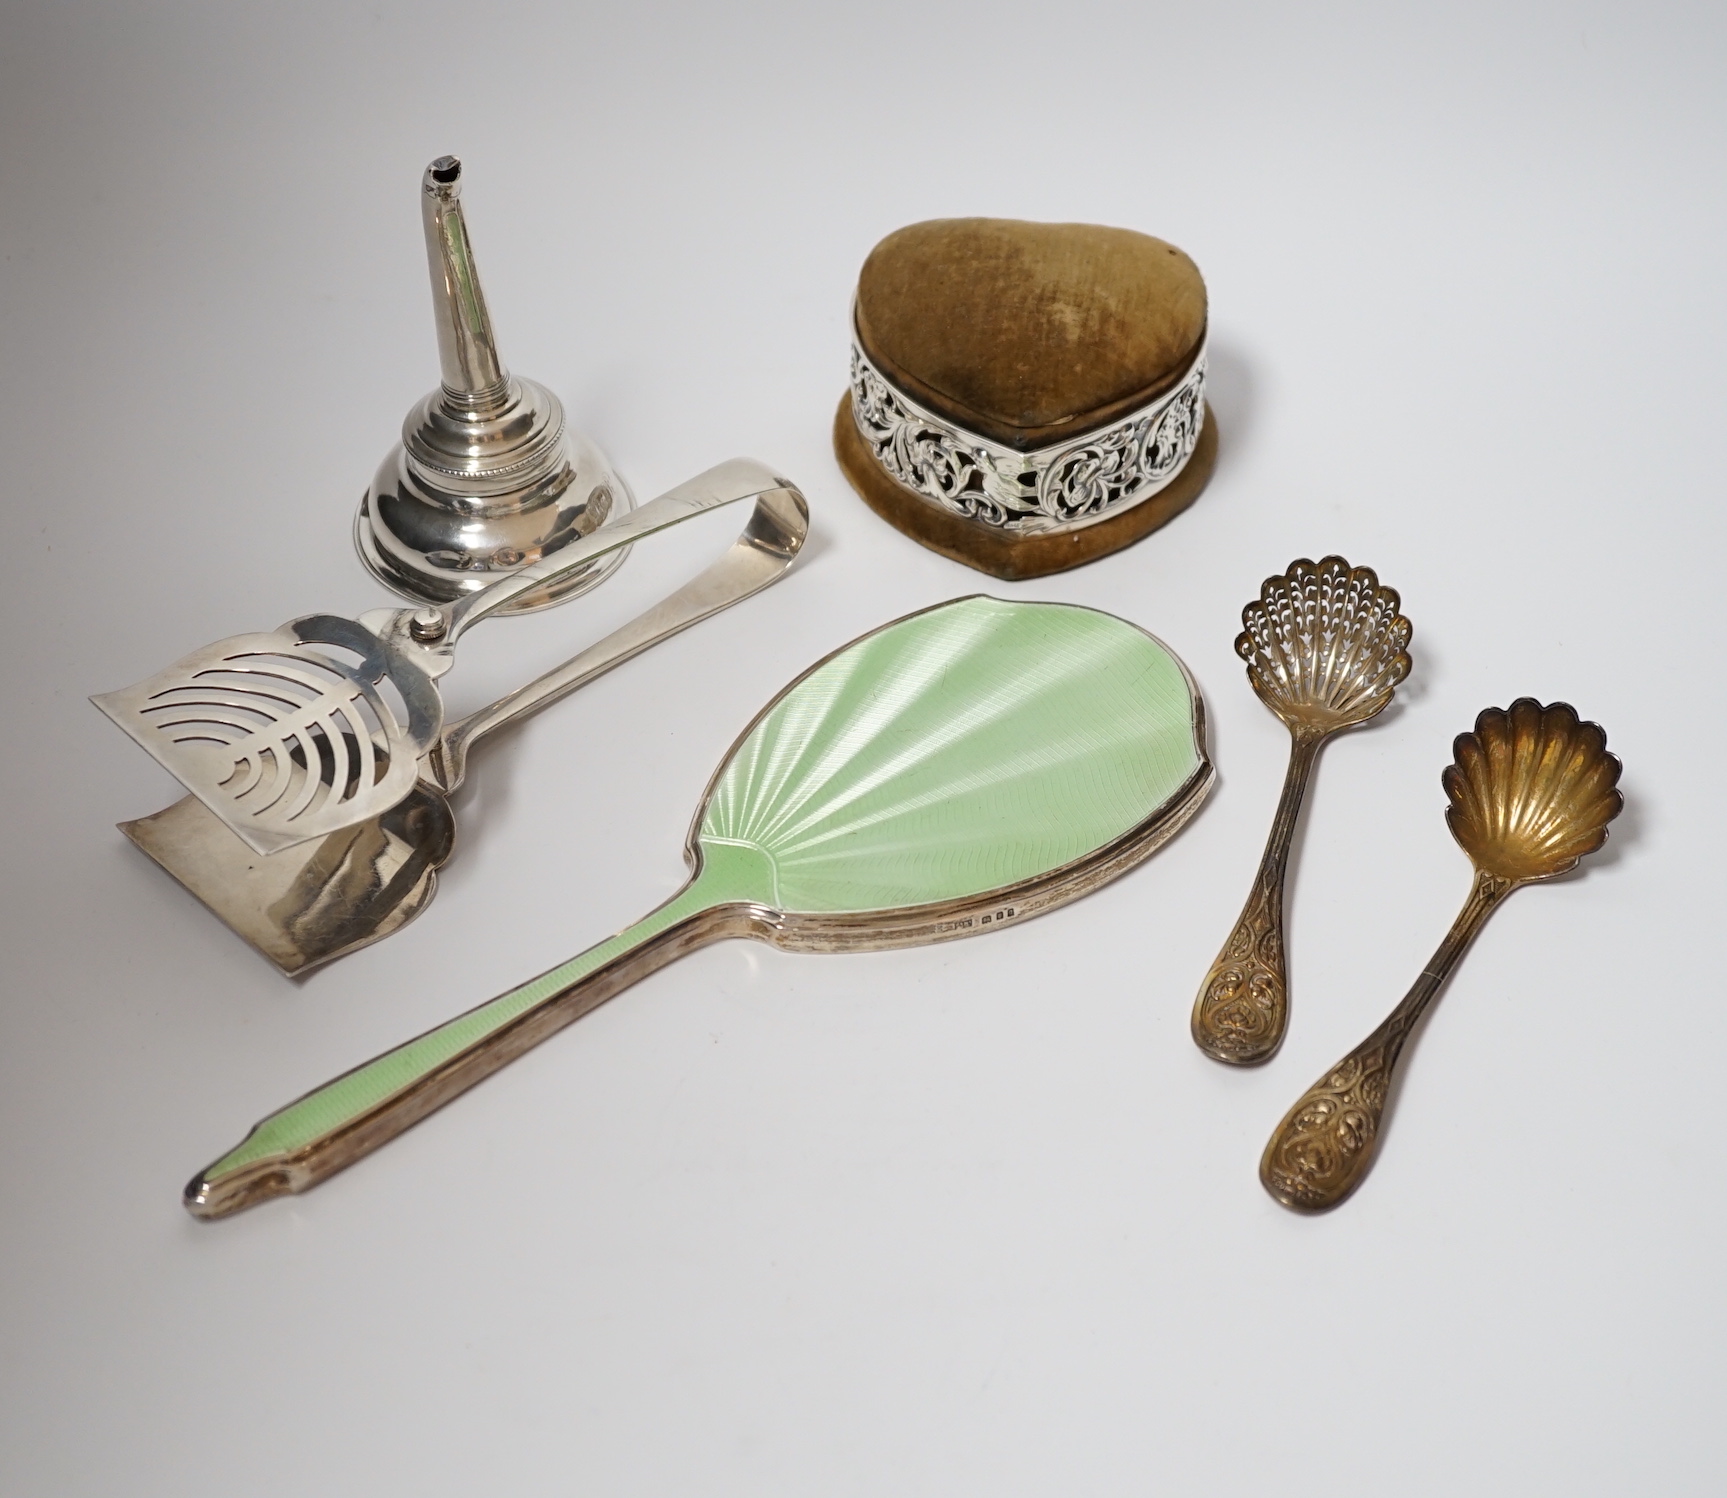 A Georgian silver wine funnel, 11.7cm (a.f.), a pair of silver servers, a pair of Victorian silver sifter spoons, George Adams, London, 1859, a silver and enamel mounted hand mirror and a George V pierced silver mounted 